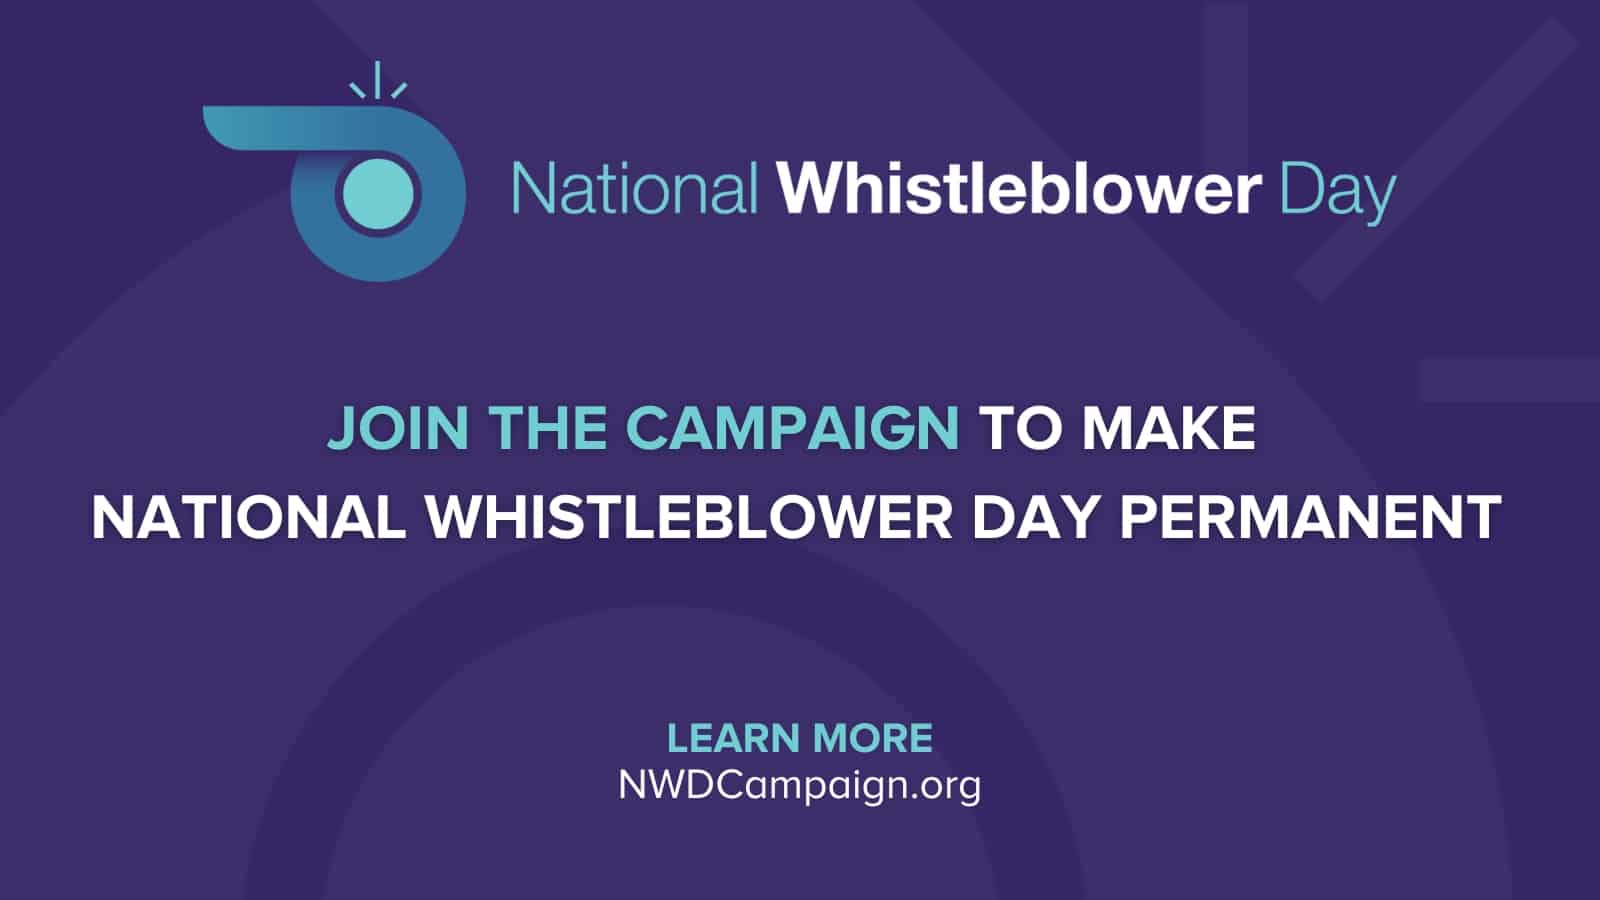 Join the Campaign - Make National Whistleblower Day Permanent